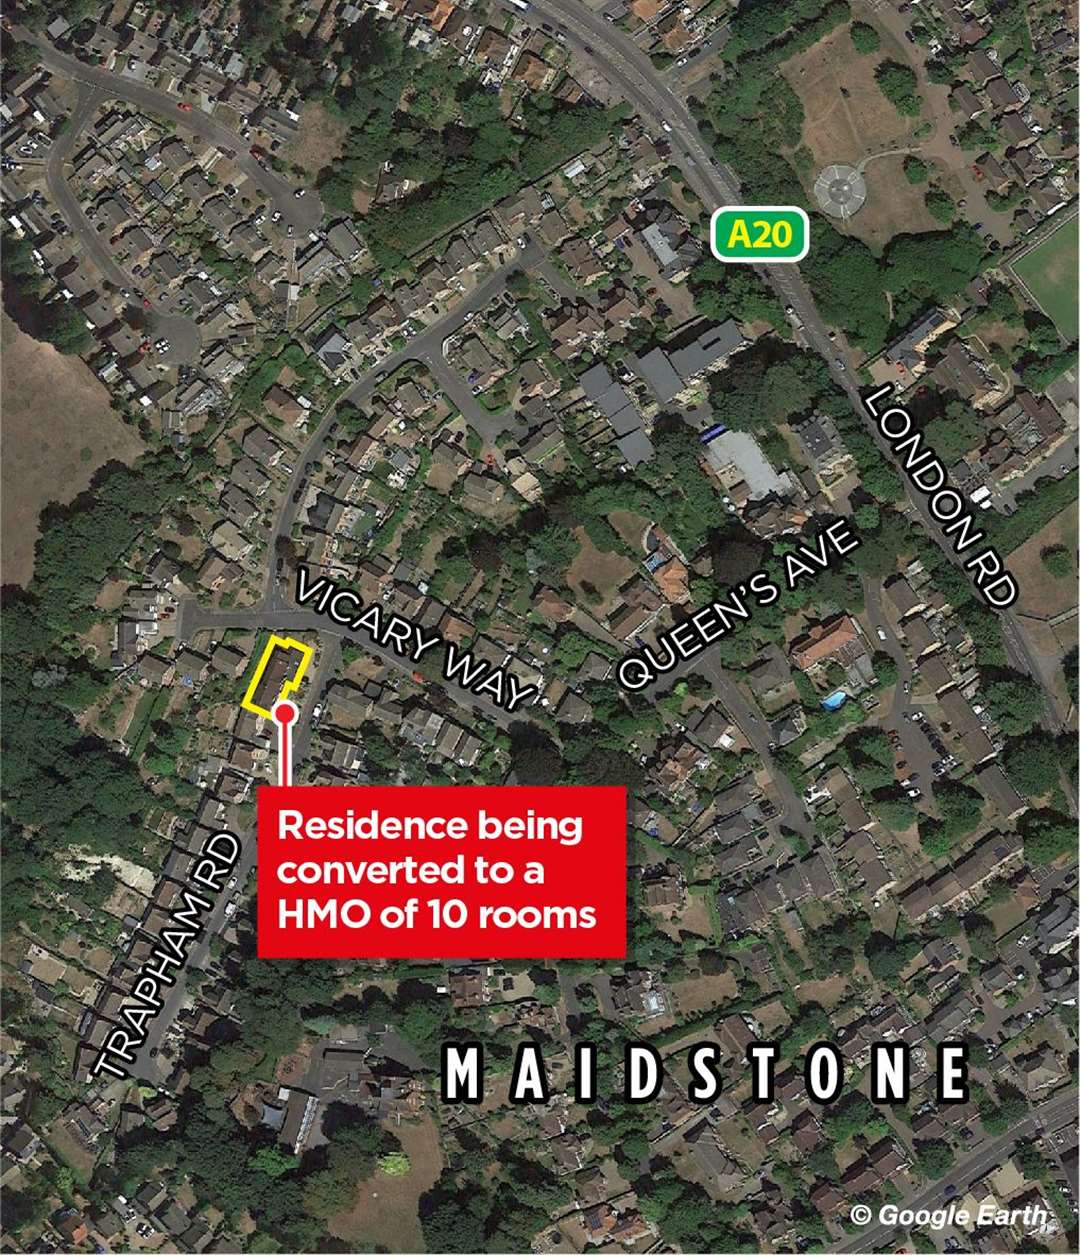 The location of the proposed HMO in Trapham Road, Allington